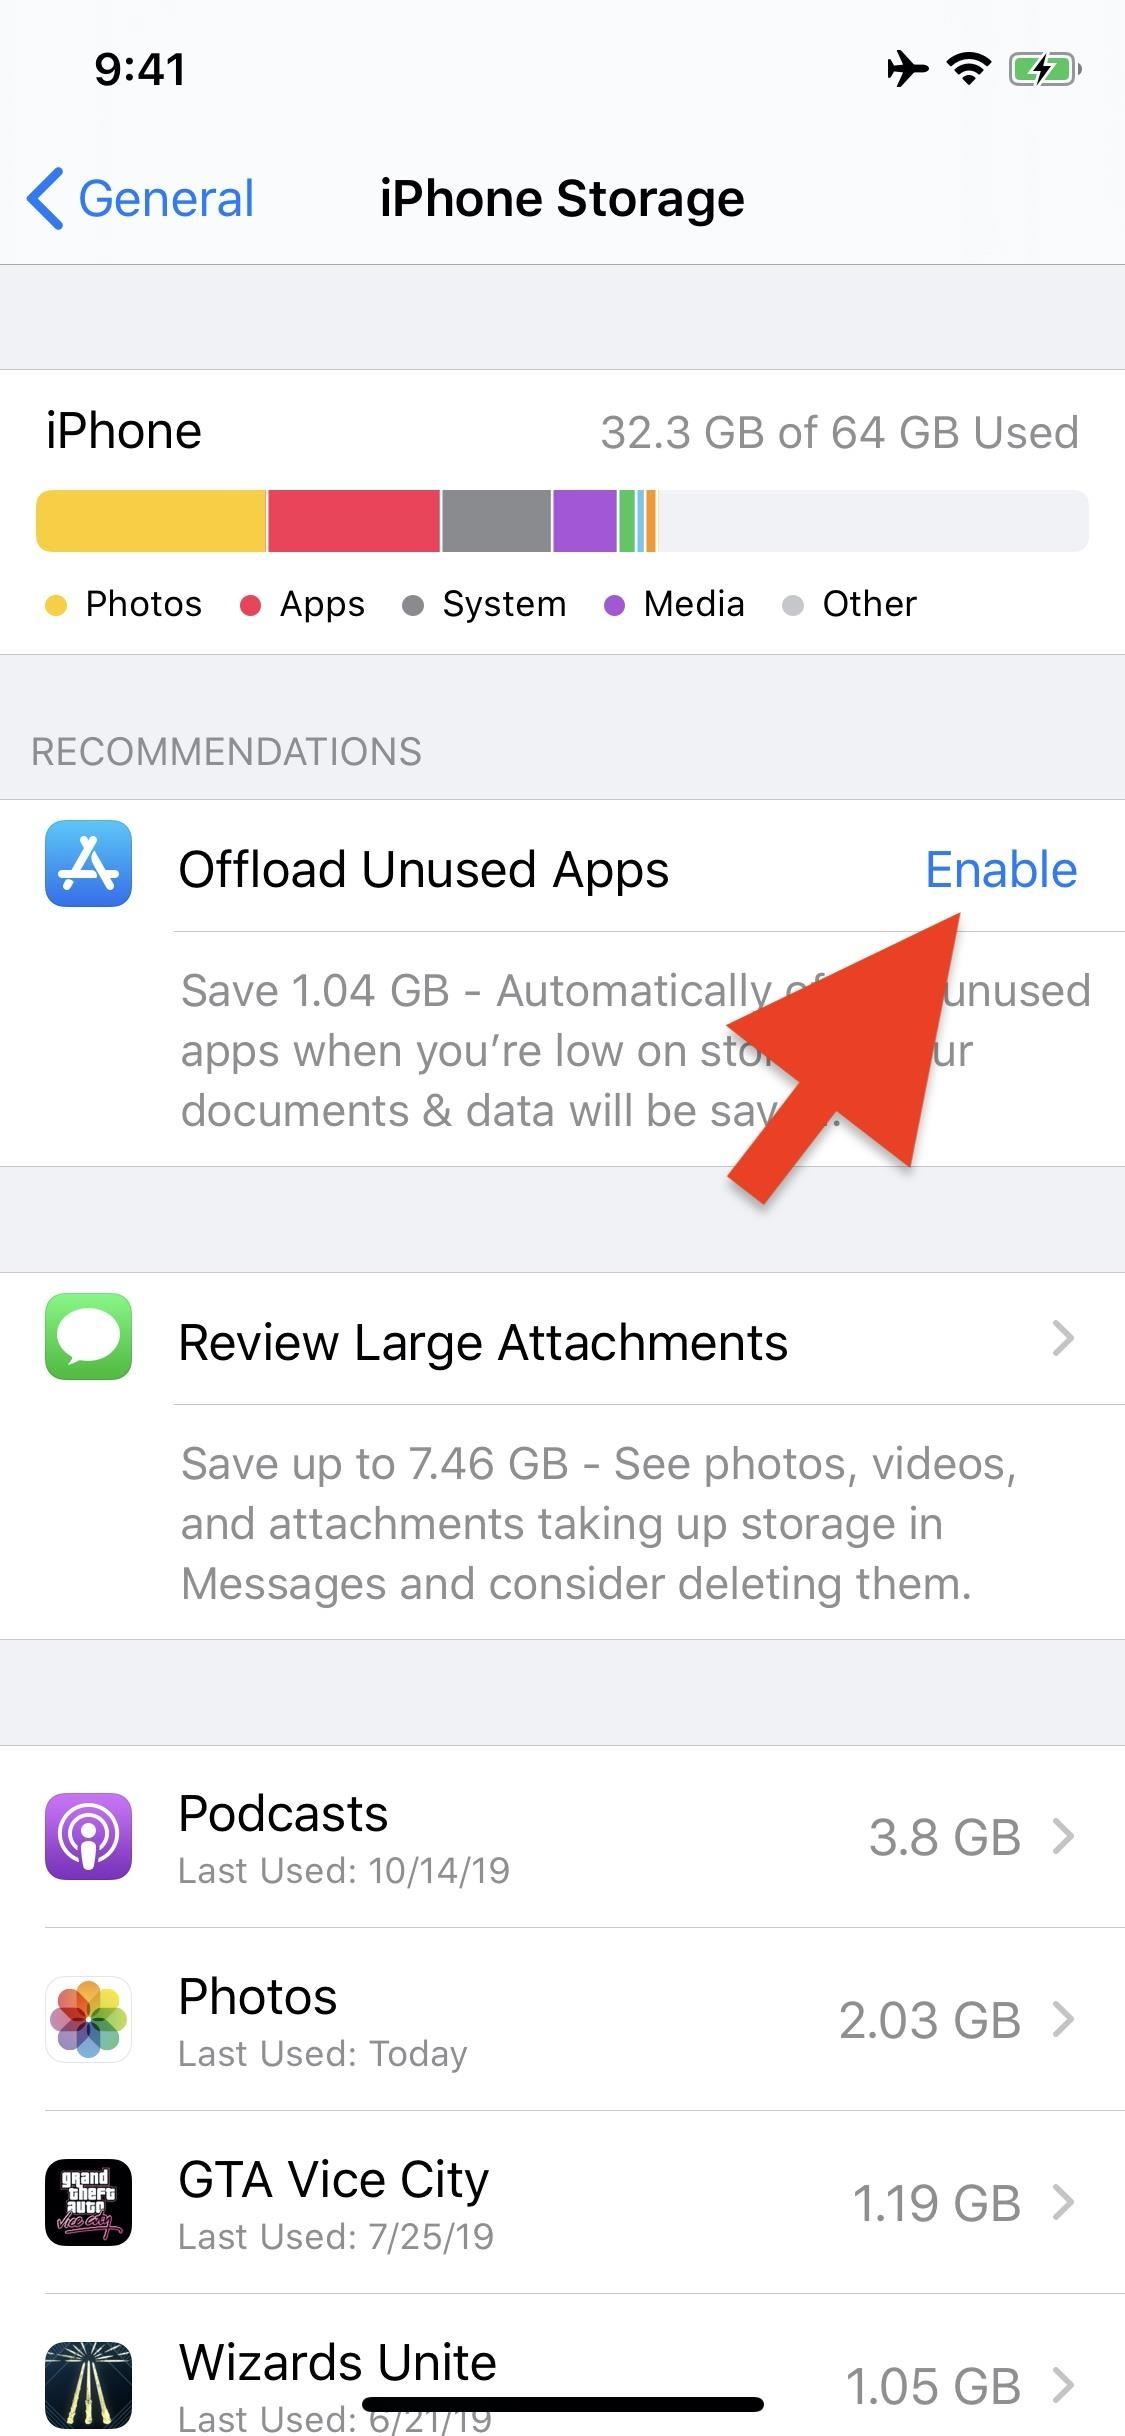 How to Offload Unused Apps to Free Up Storage Space on Your iPhone